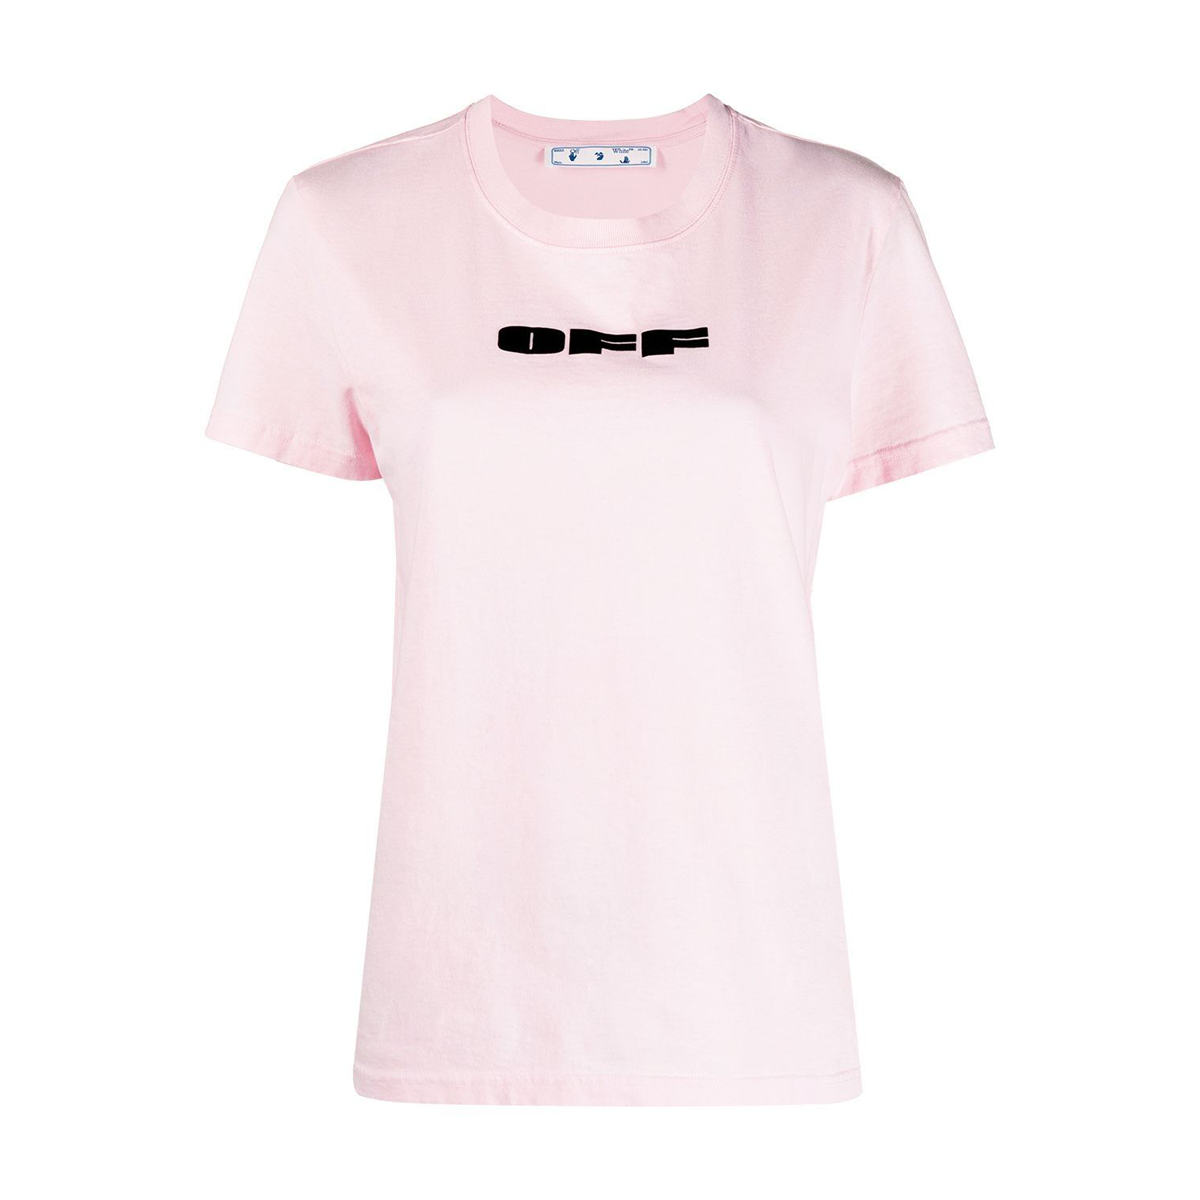 Off bold flock casual tee pink black